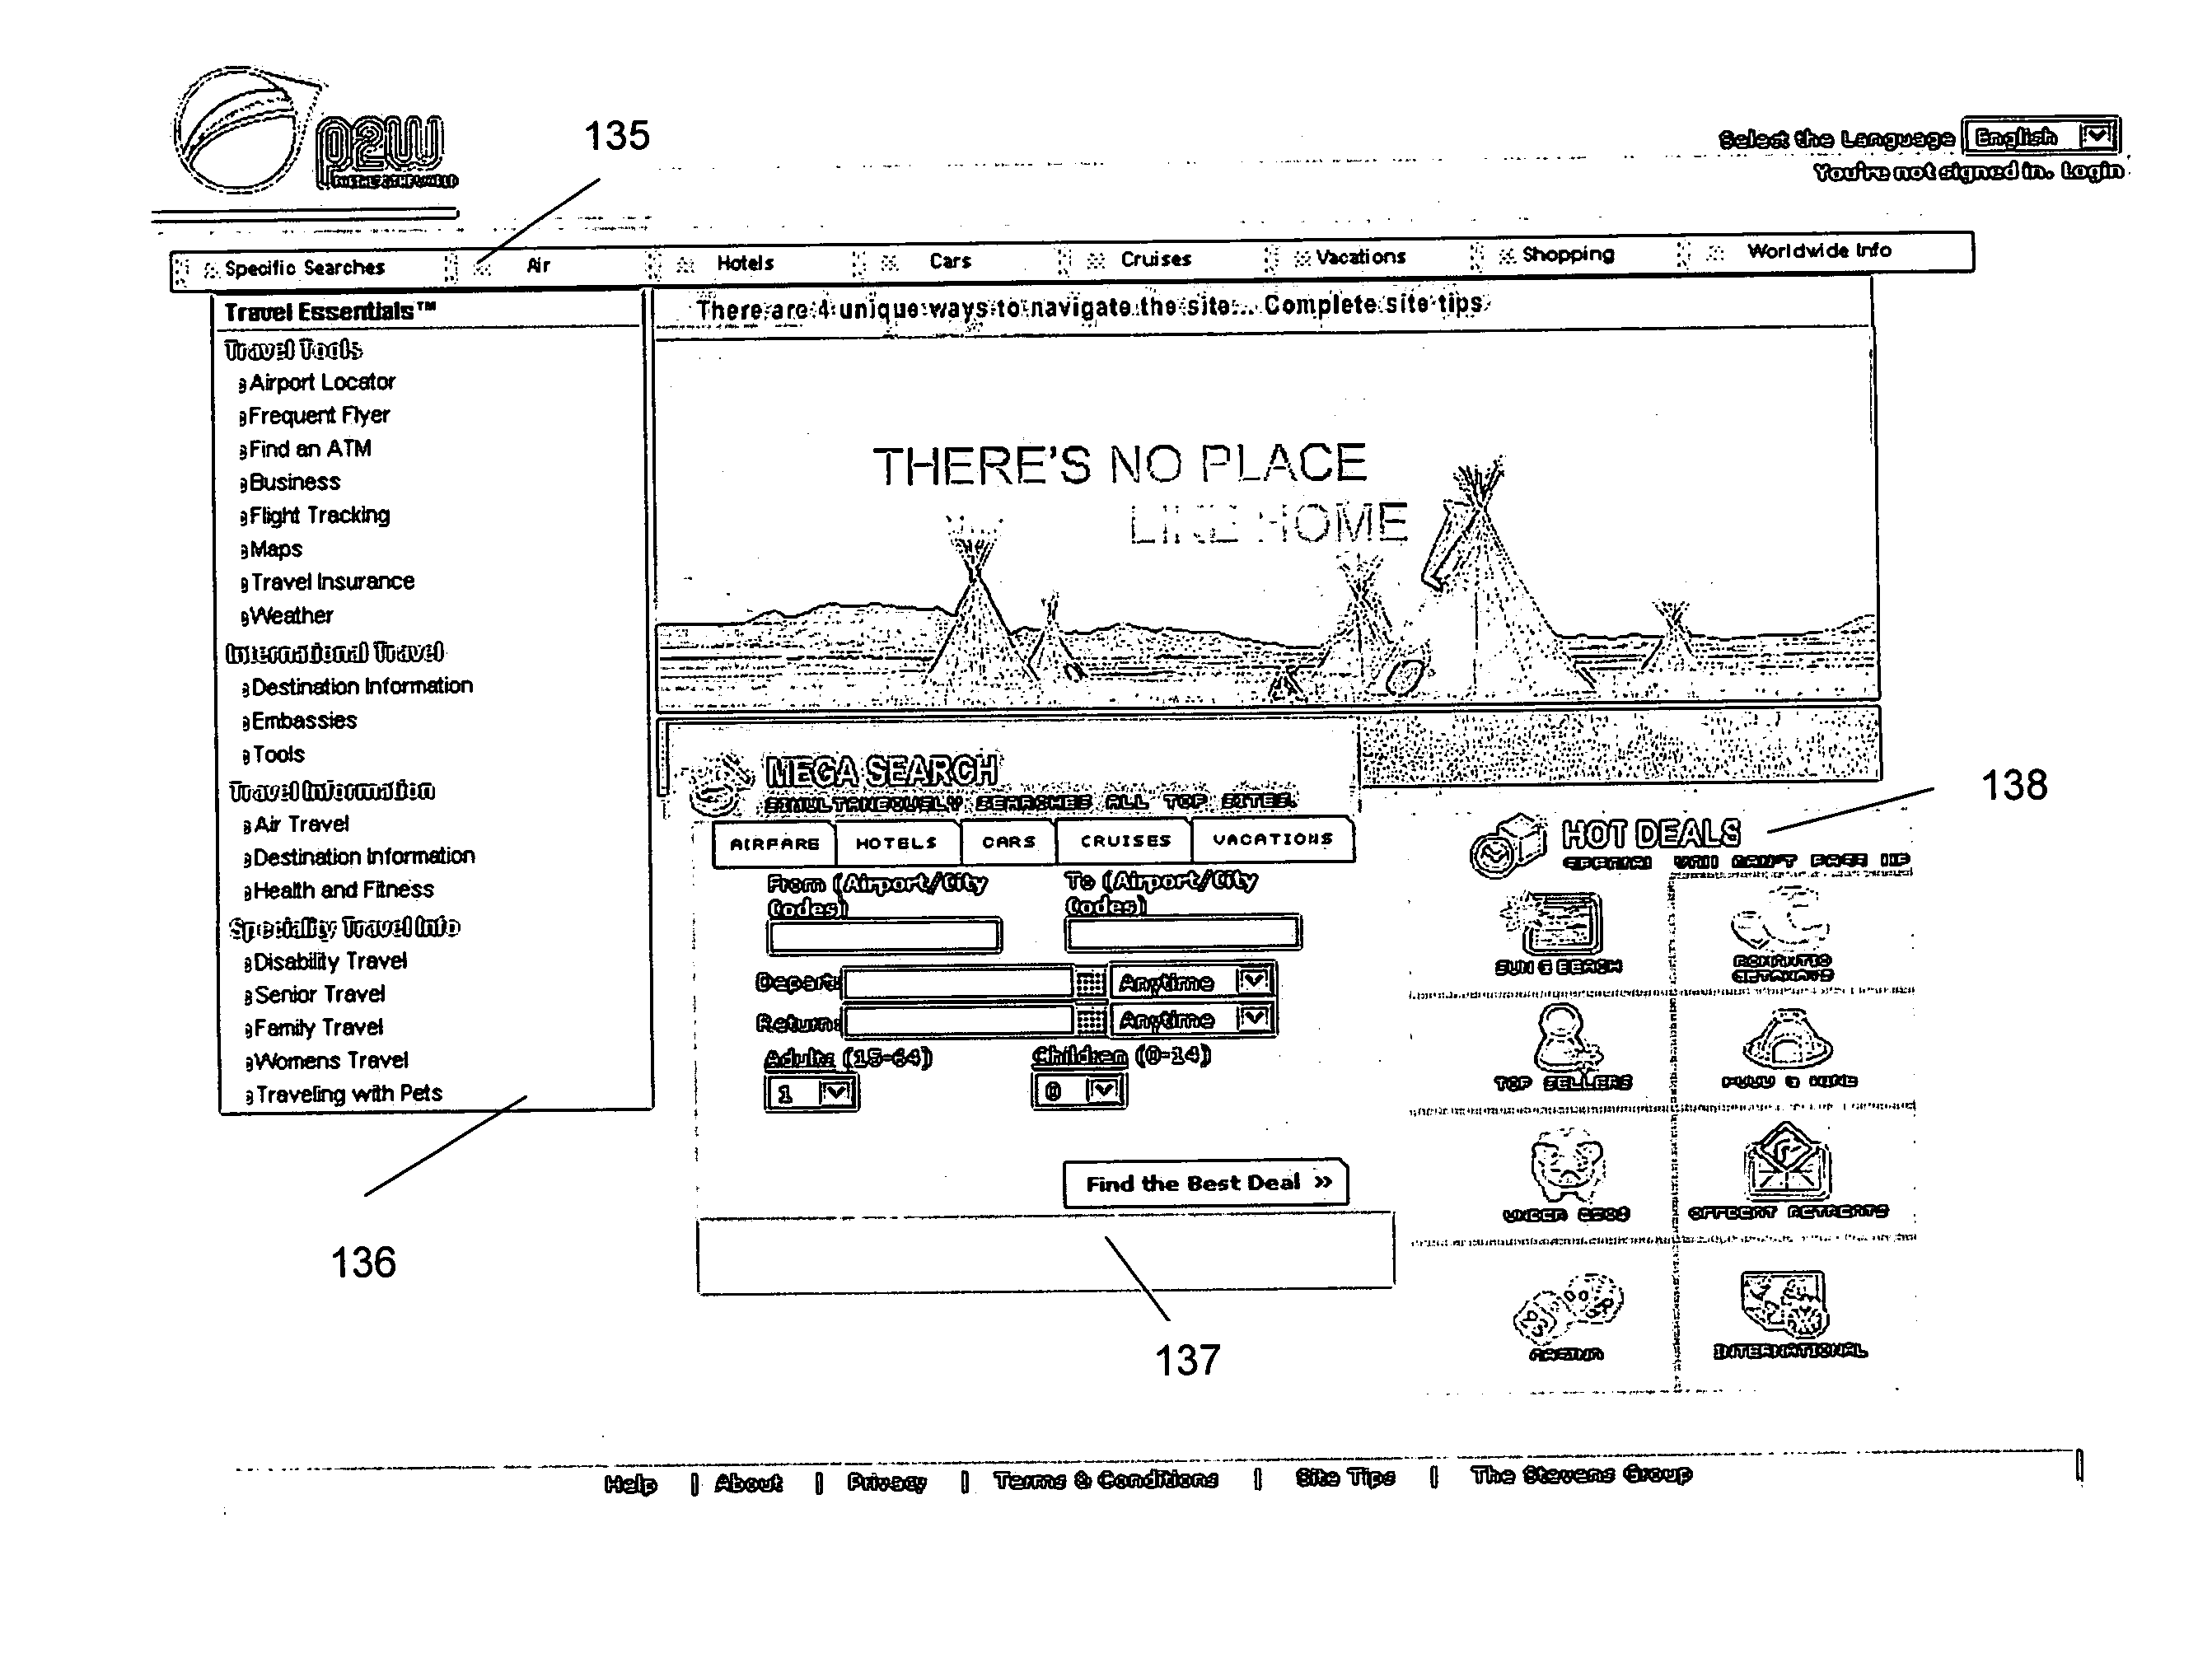 Graphical user interface for and method of use for a computer-implemented system and method for booking travel itineraries